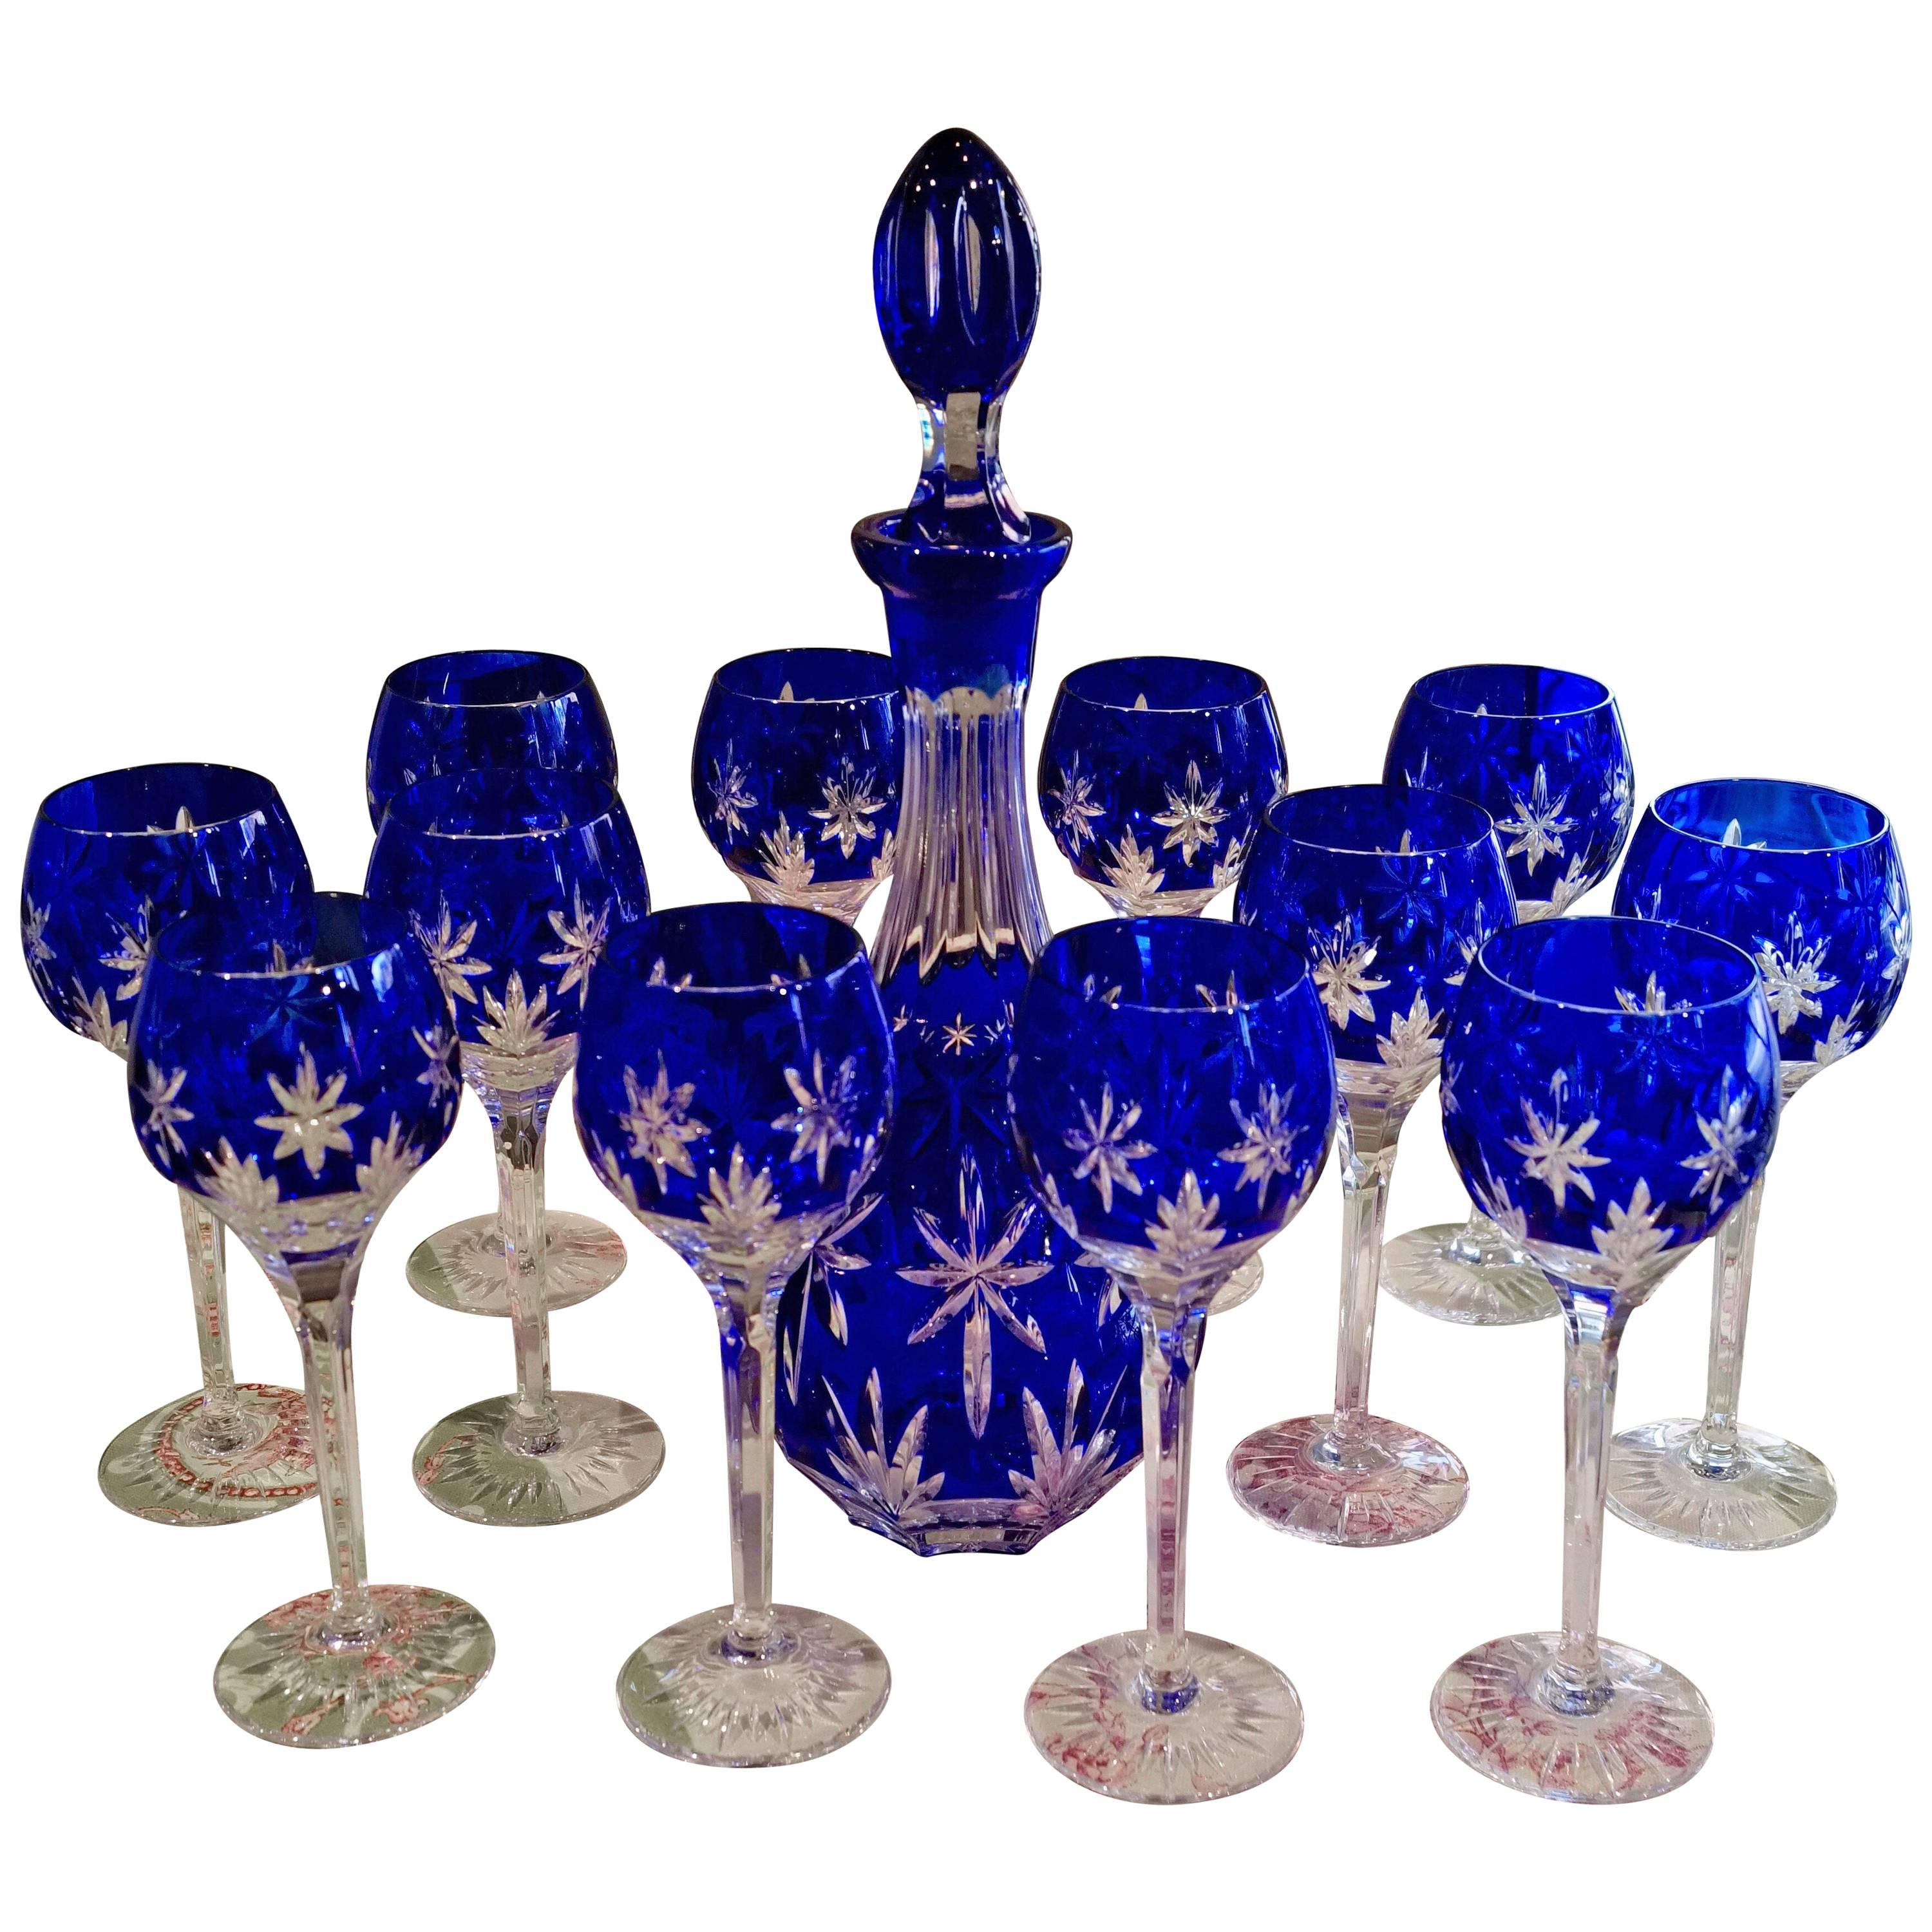 Blue Crystal Engraved Service, One Carafe and 12 Stemmed Glasses, circa 1950